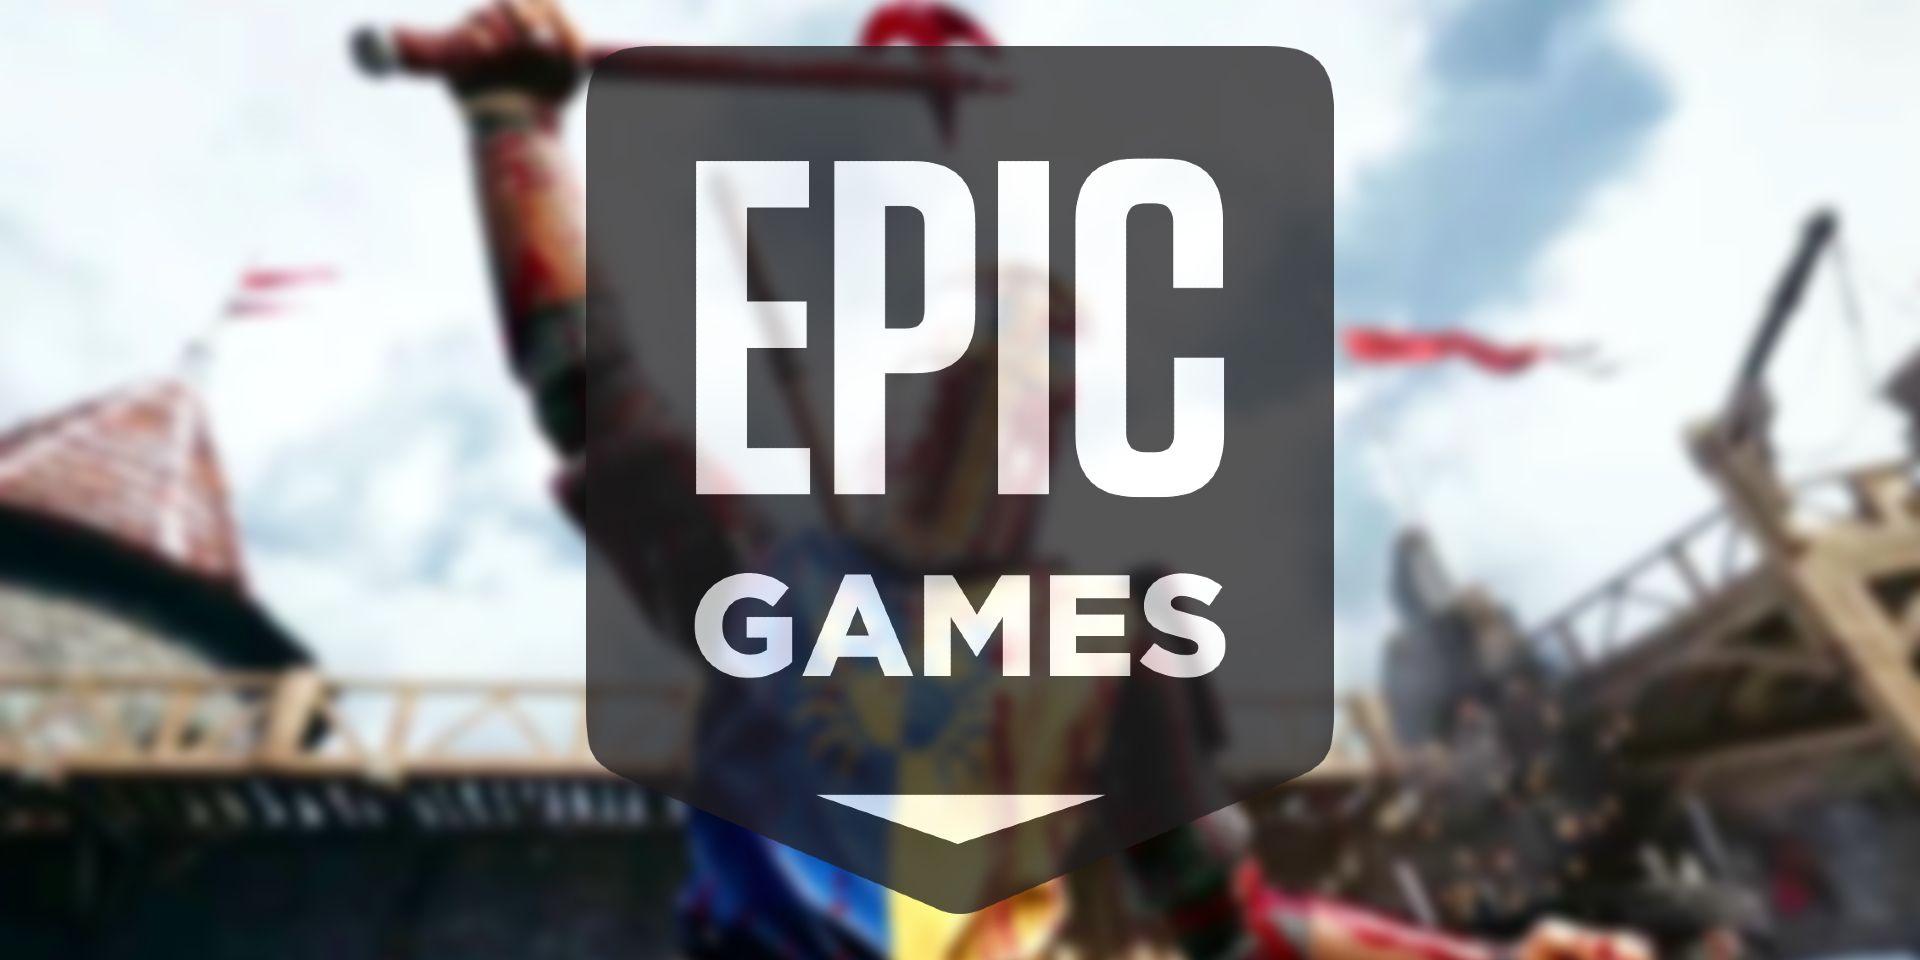 The Epic Games logo over a blurred picture of a knight raising a bloody axe in the air.